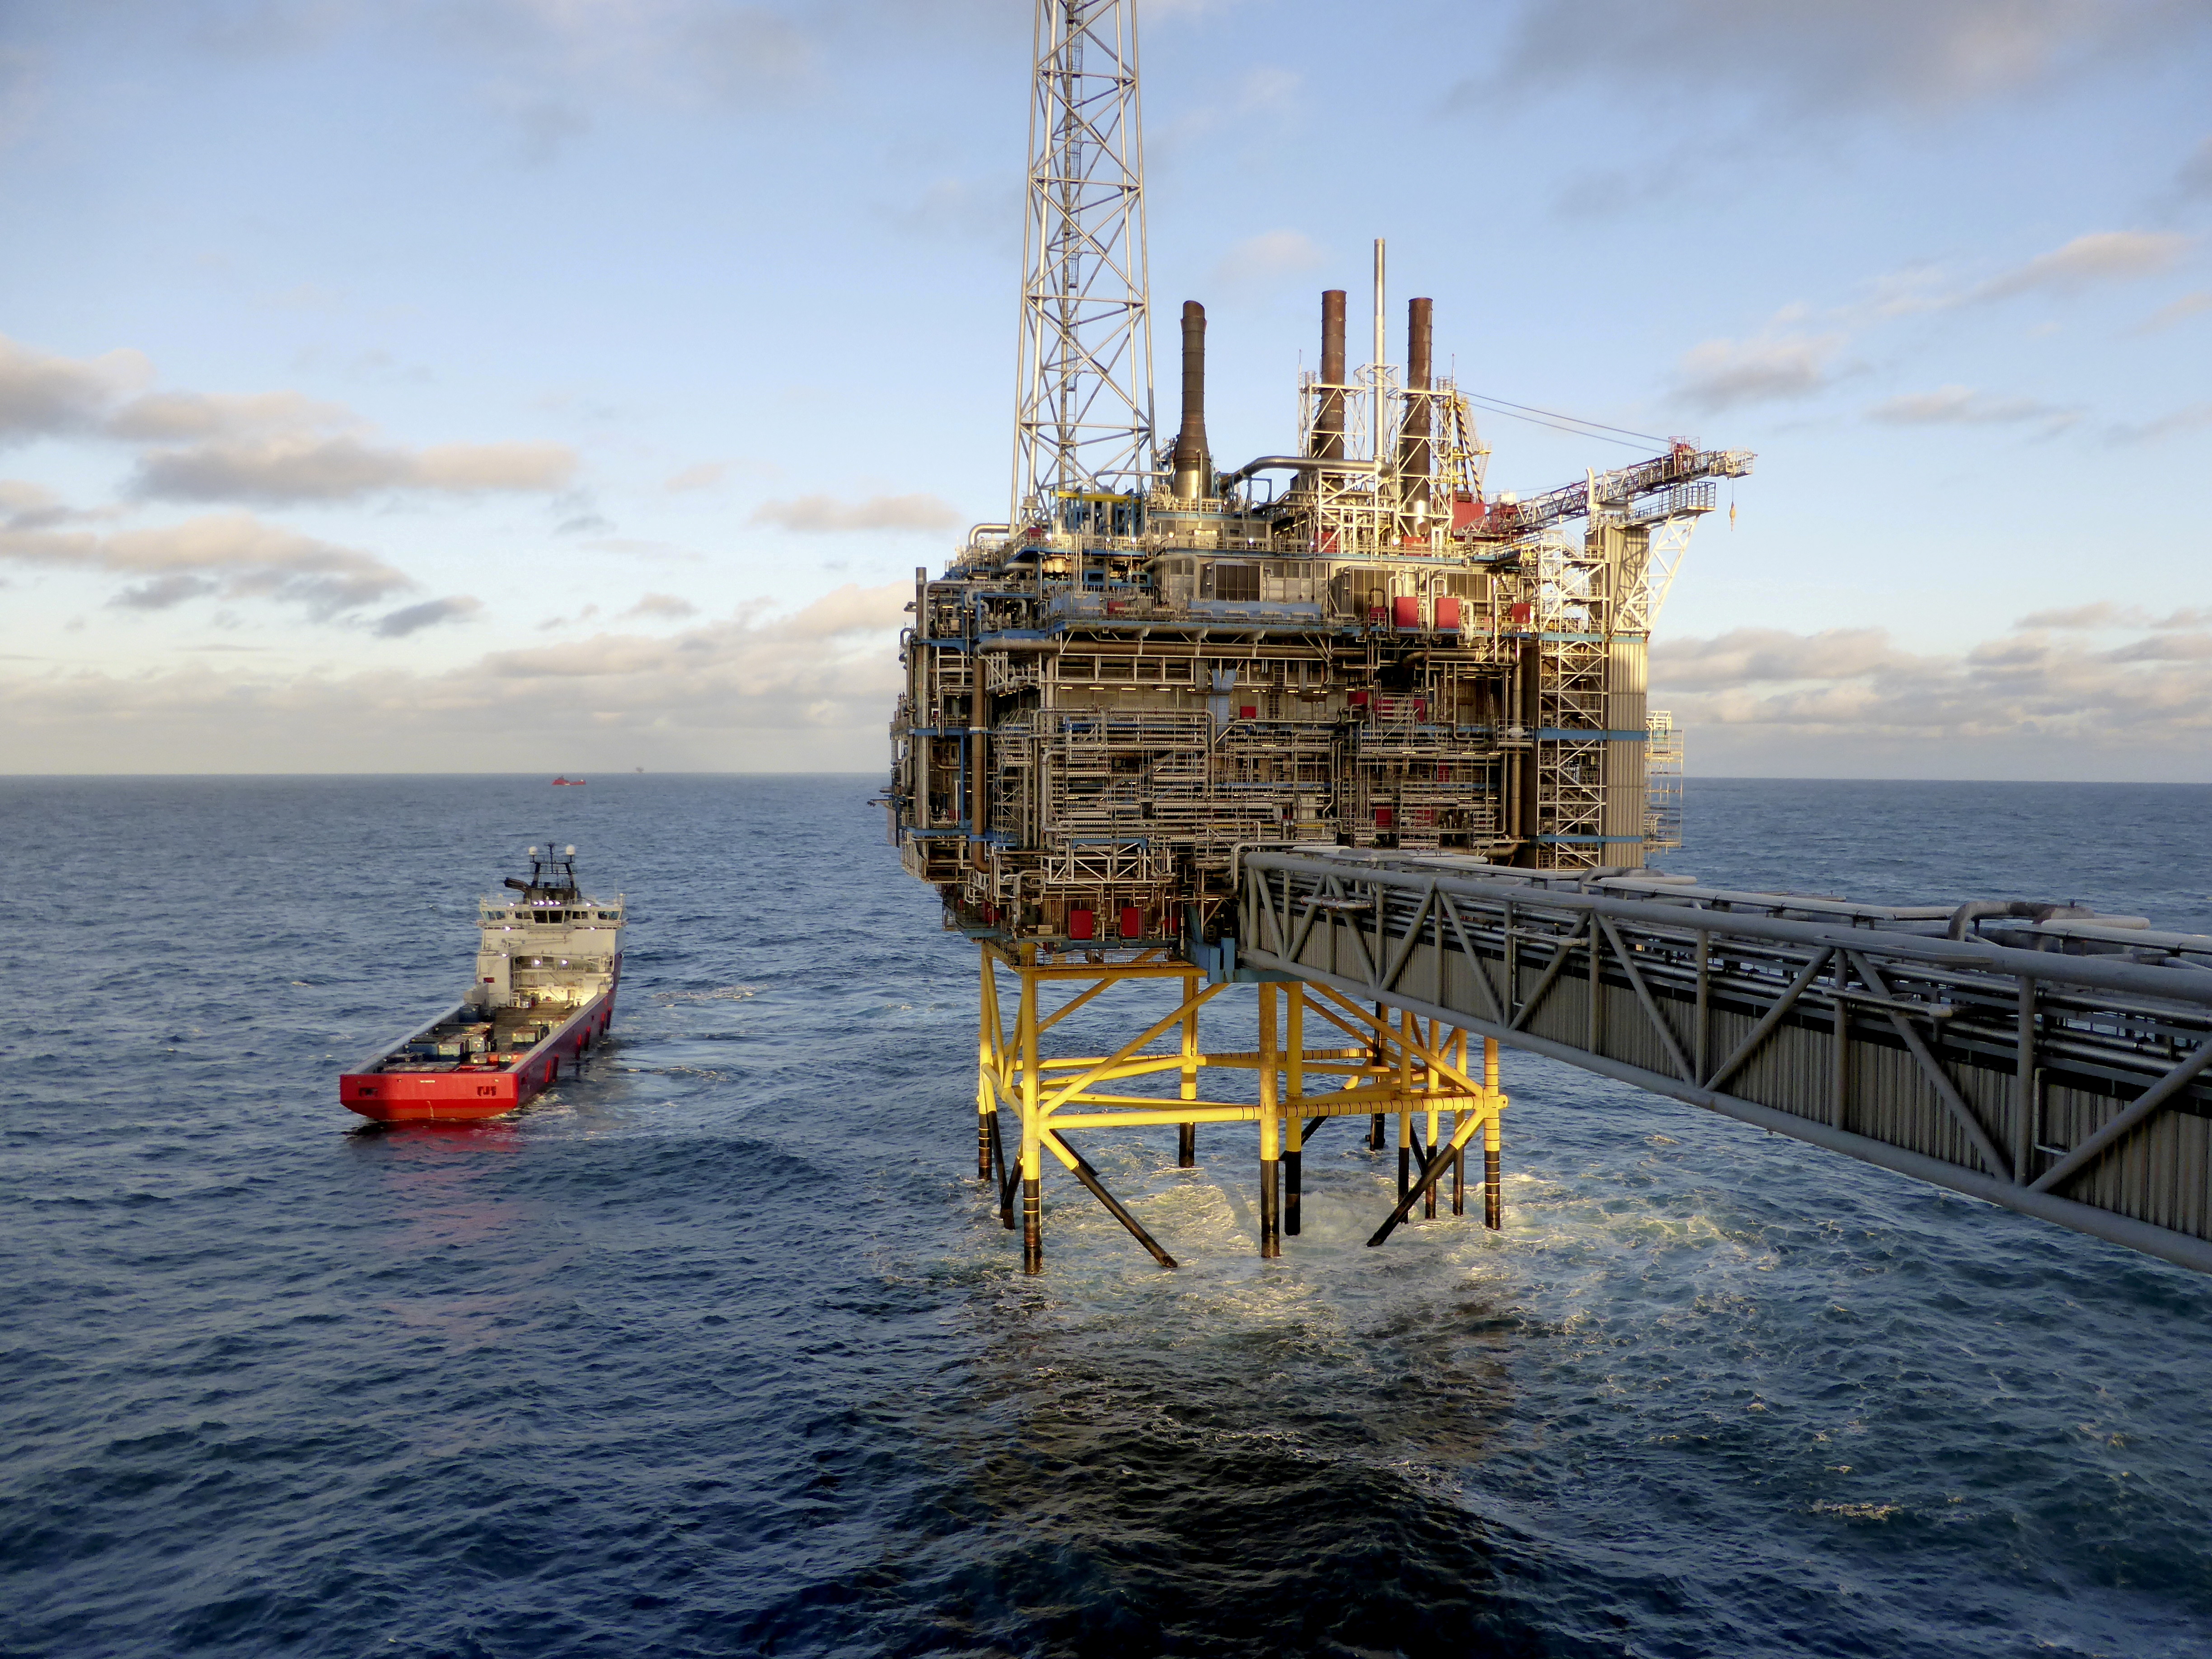 Oil and gas company Statoil's gas processing and CO2 removal platform Sleipner T is pictured offshore near Stavanger, Norway